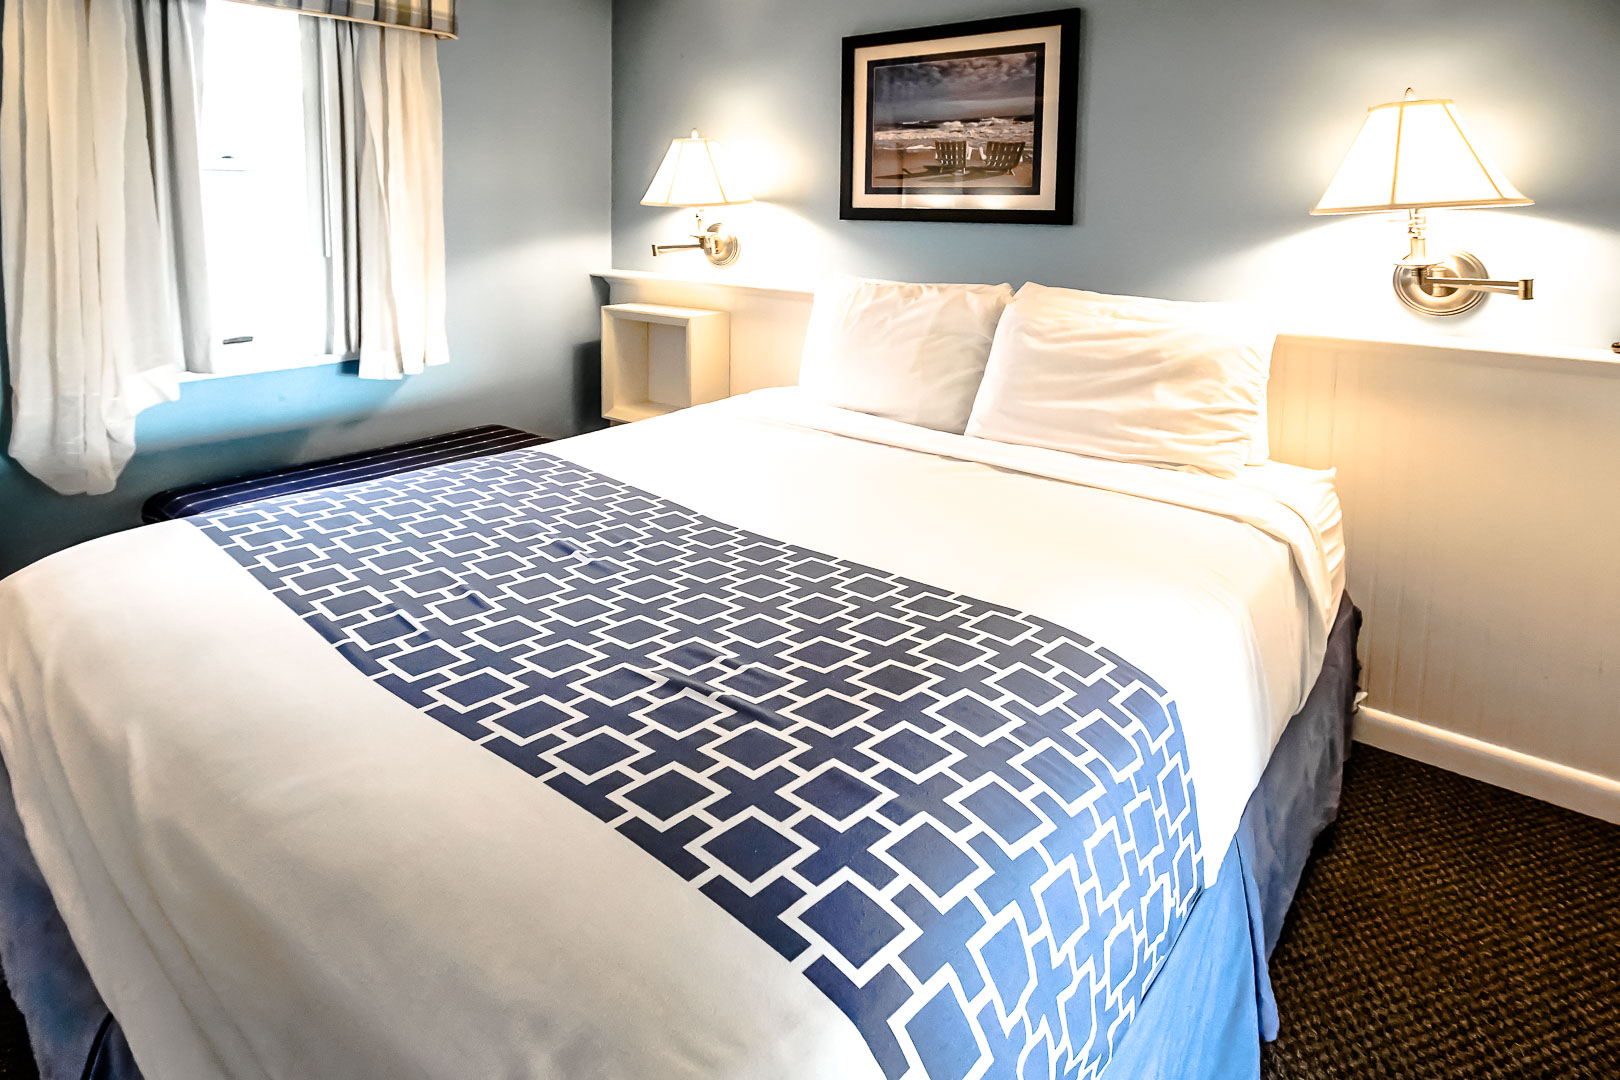 A crisp and clean master bedroom with a king size bed at VRI's Seawinds II Resort in Massachusetts.